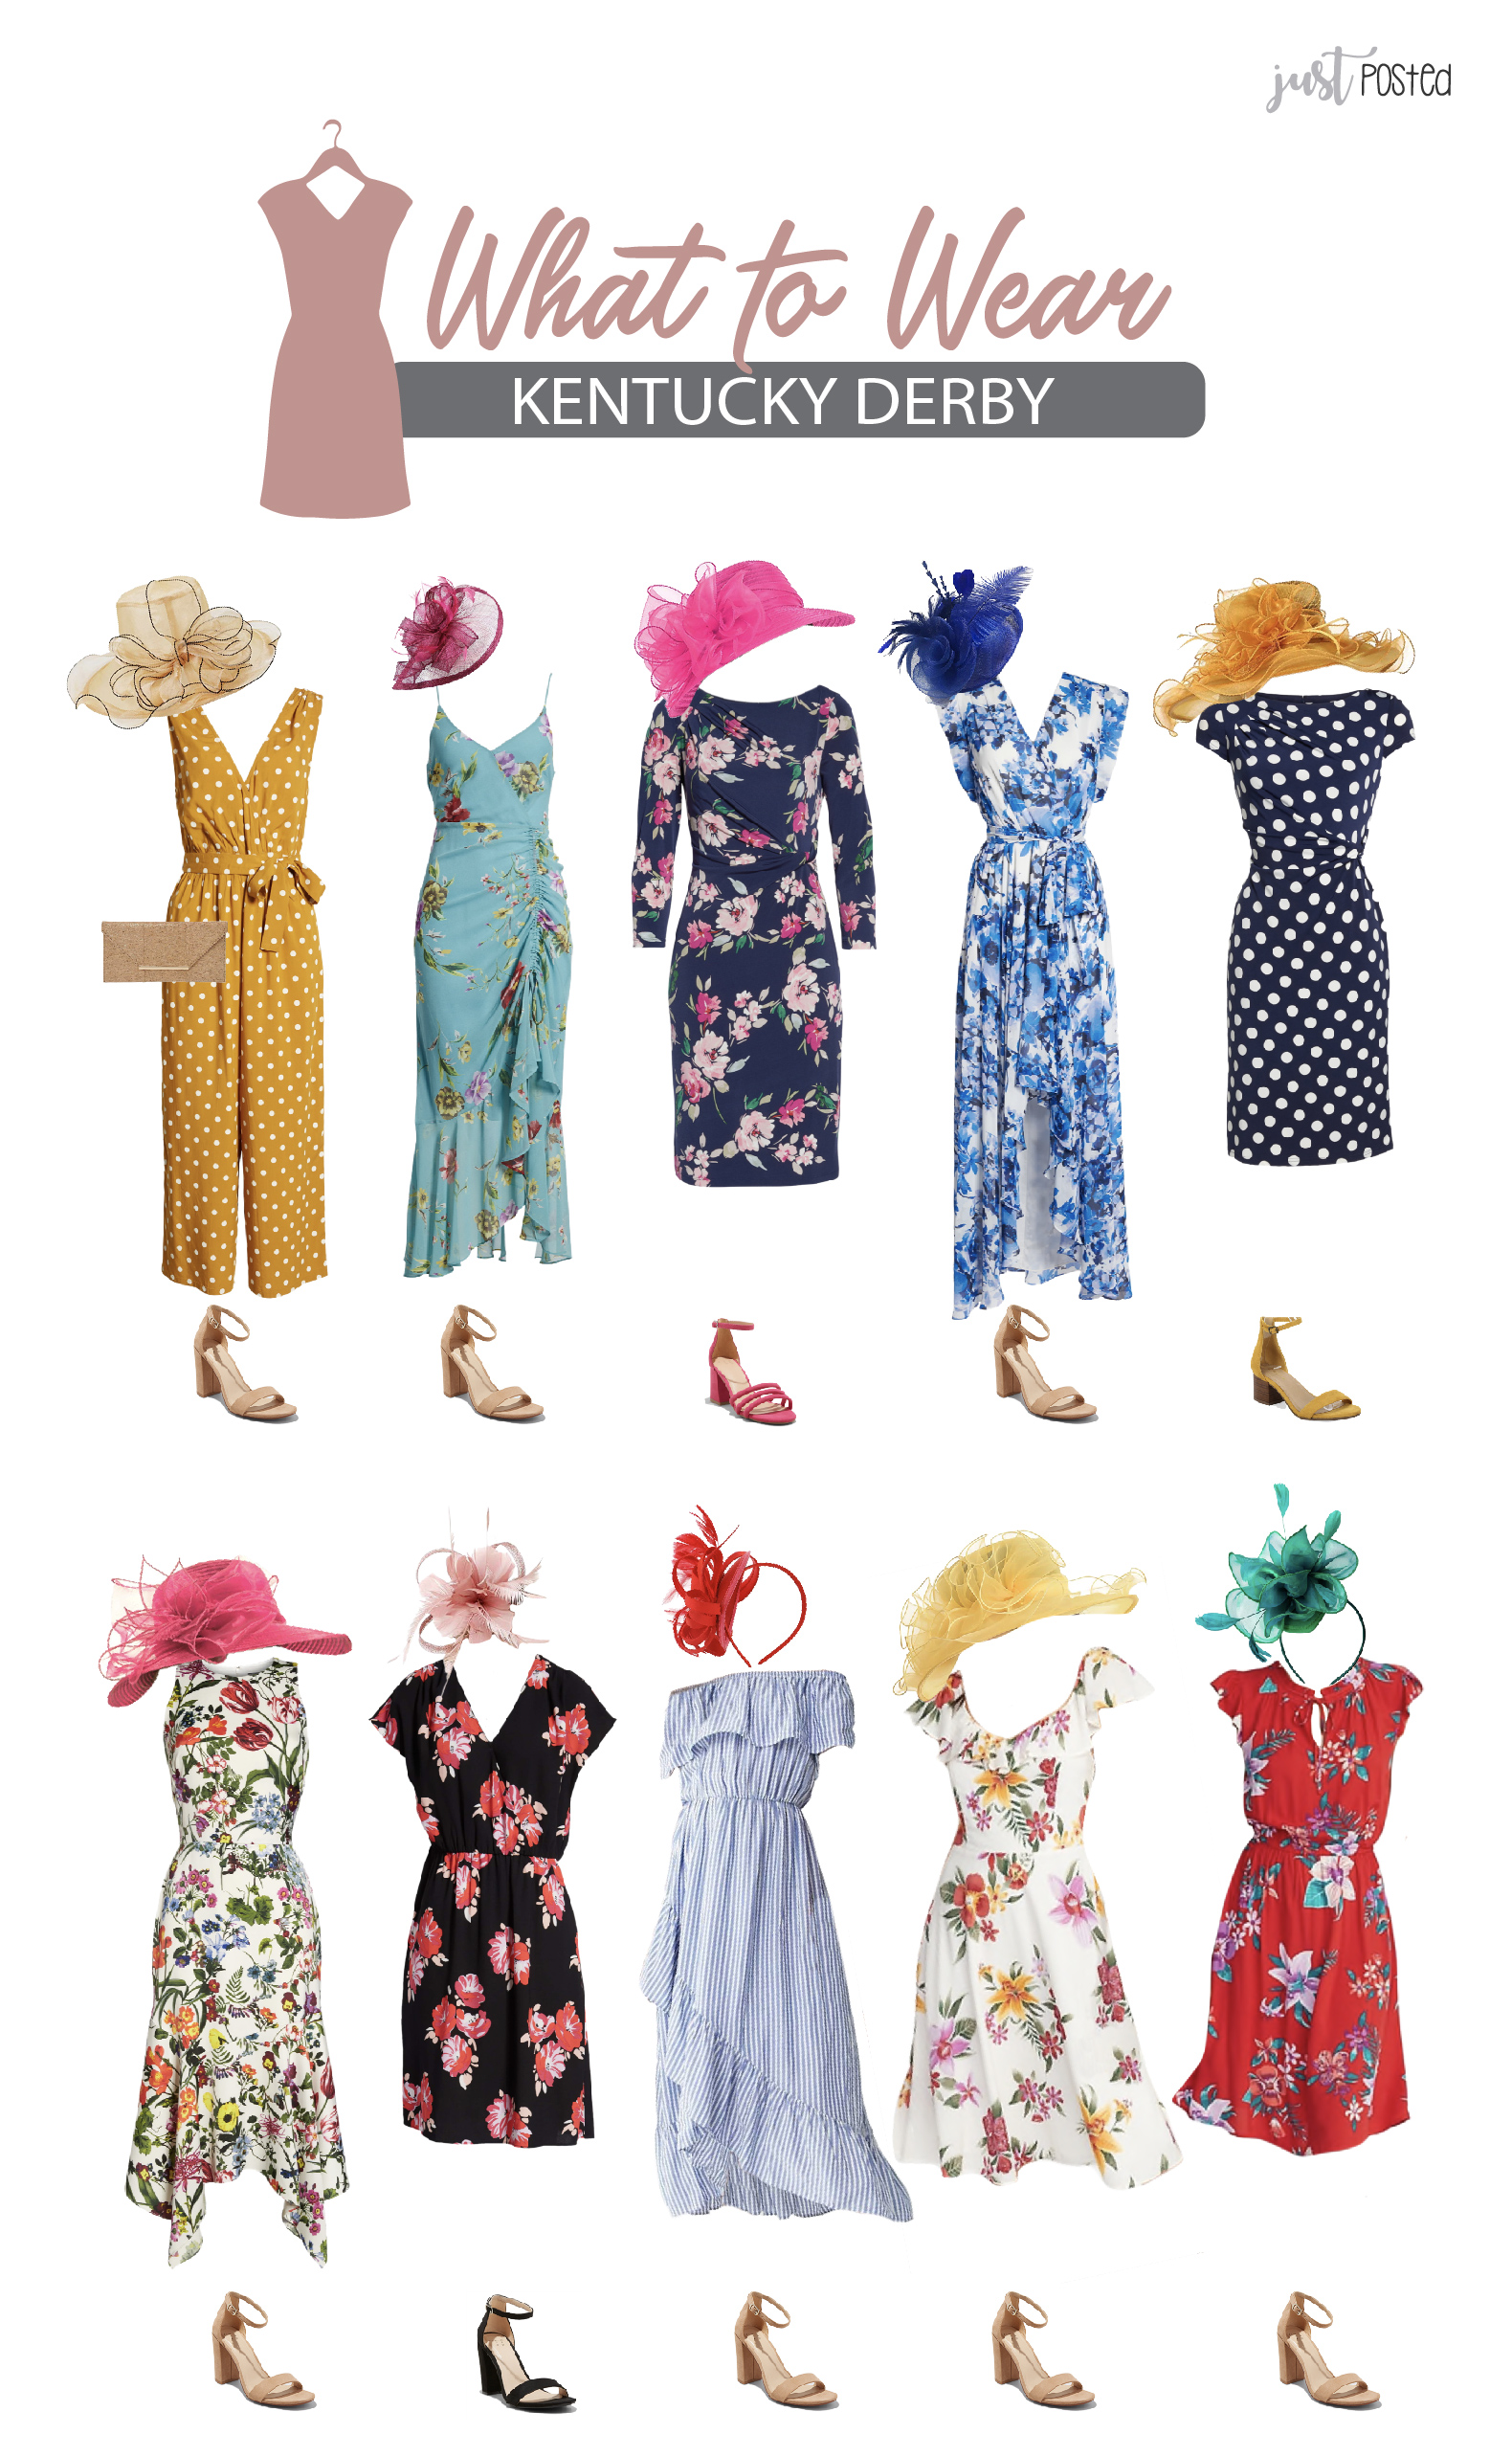 What to Wear Kentucky Derby Just Posted